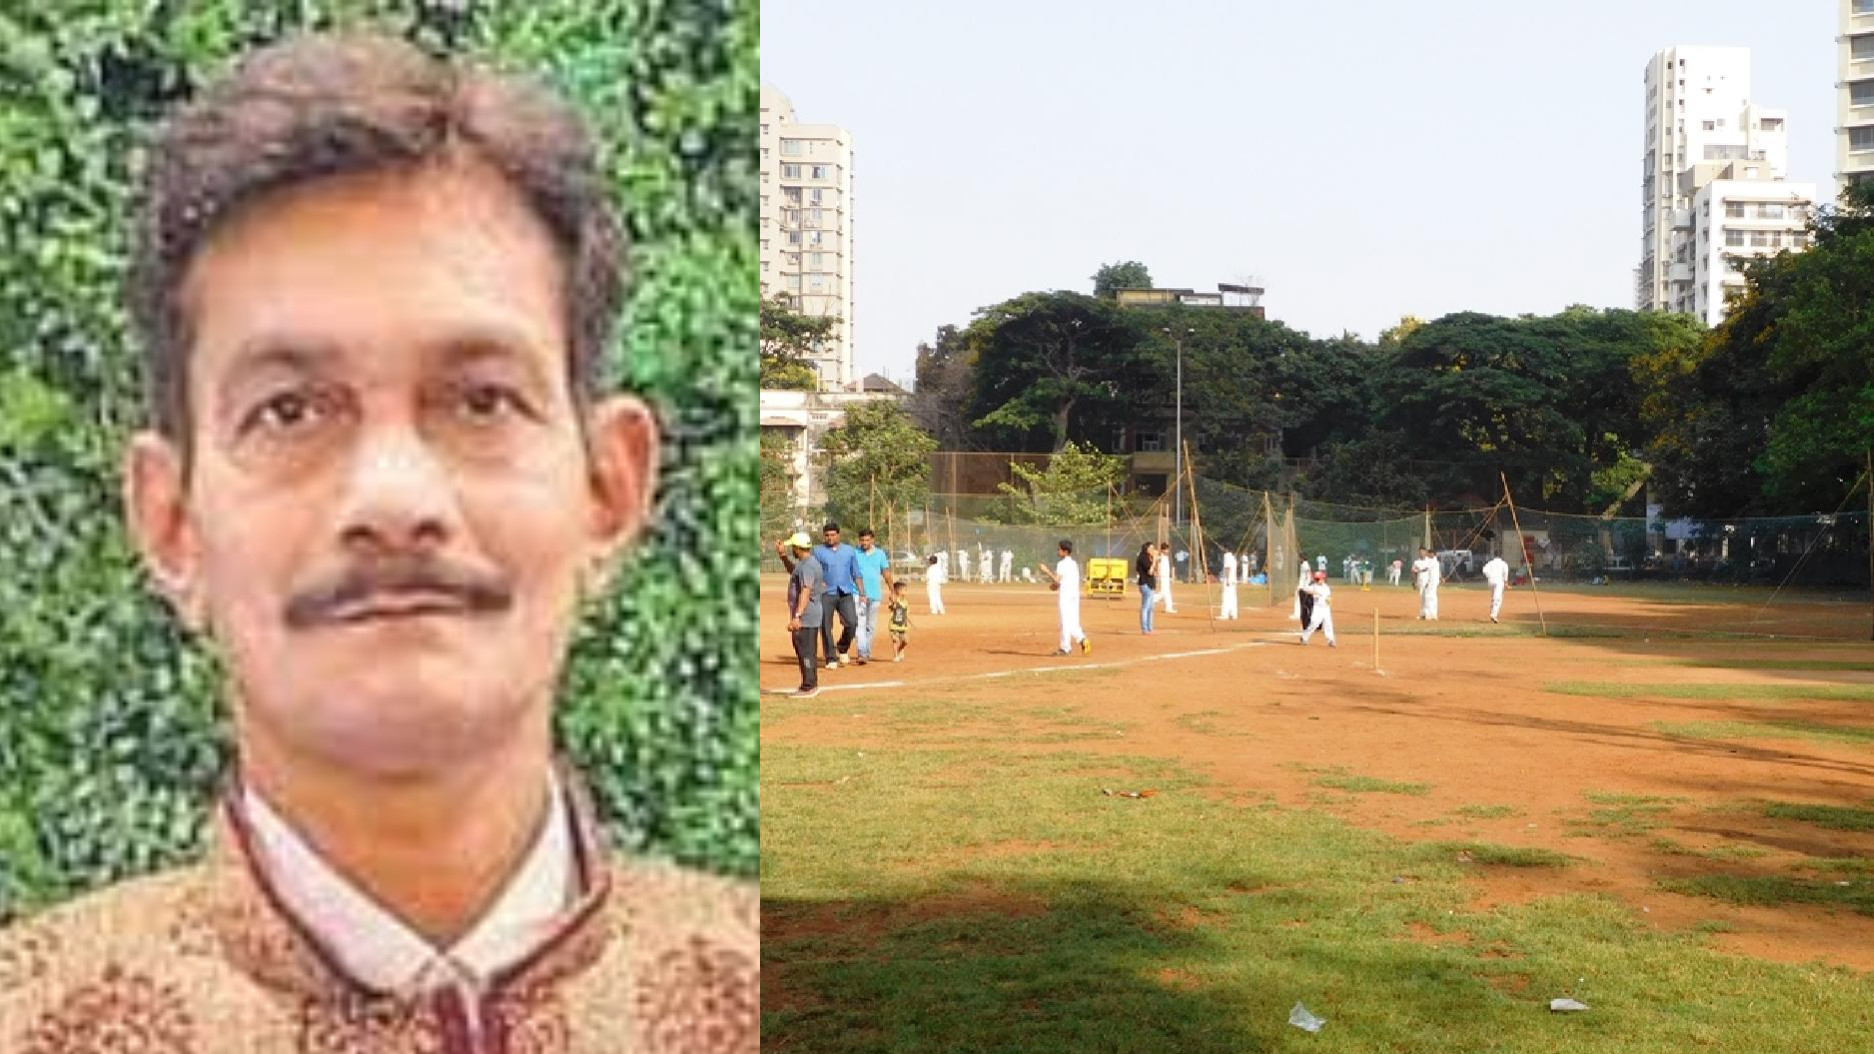 52-year-old cricketer dies on the ground in Mumbai after being hit on the head